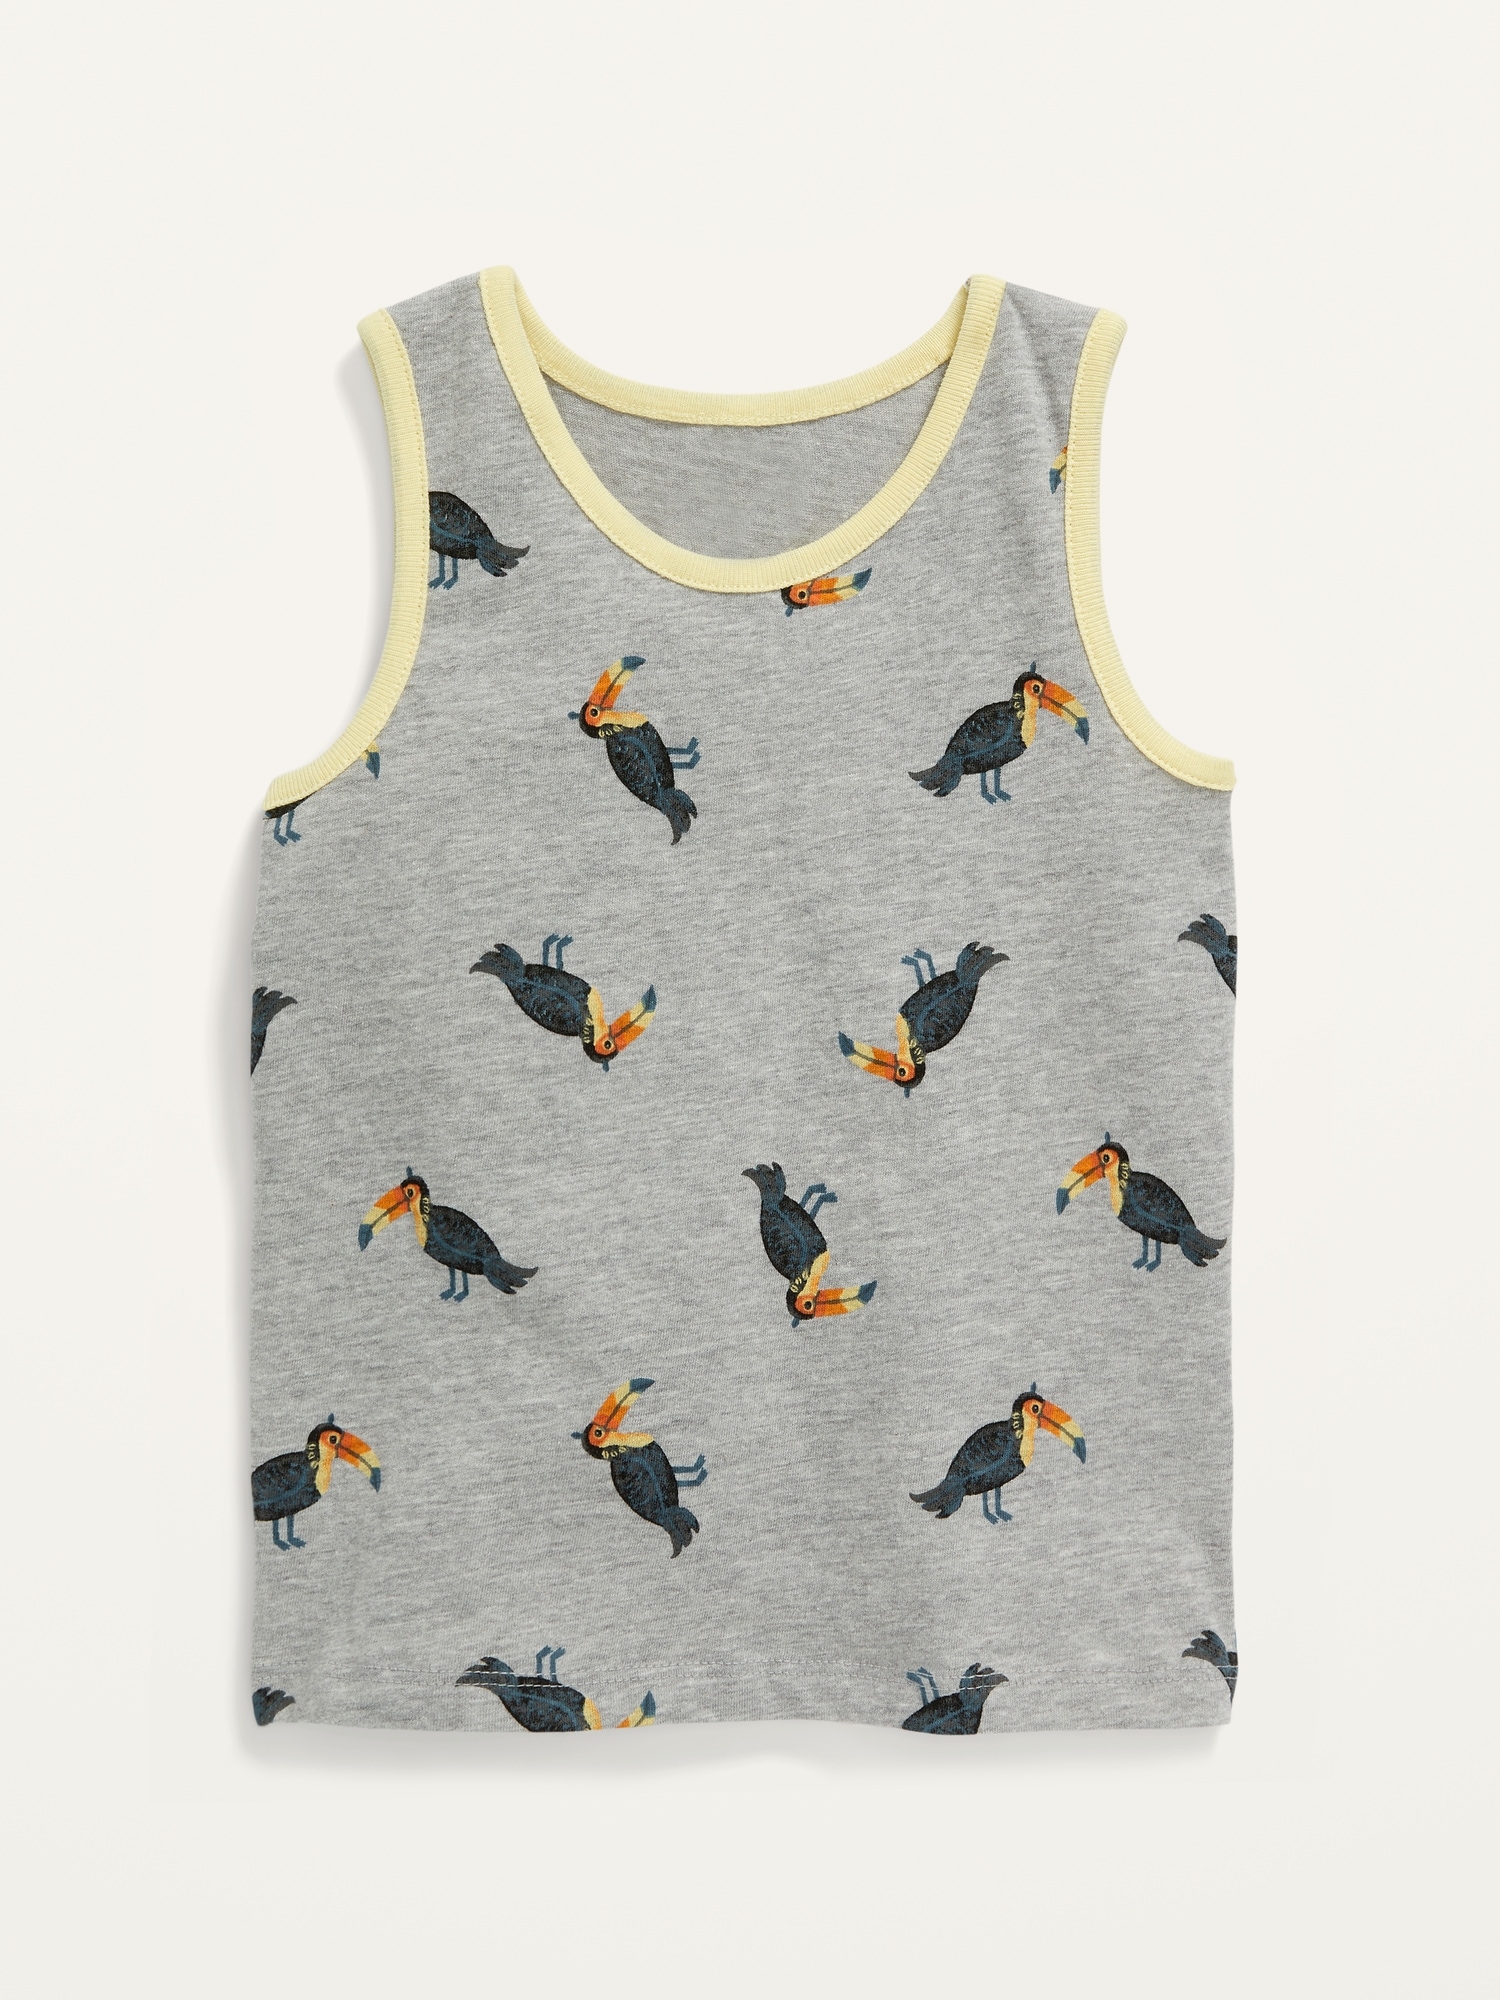 Unisex Printed Tank Top for Toddler | Old Navy